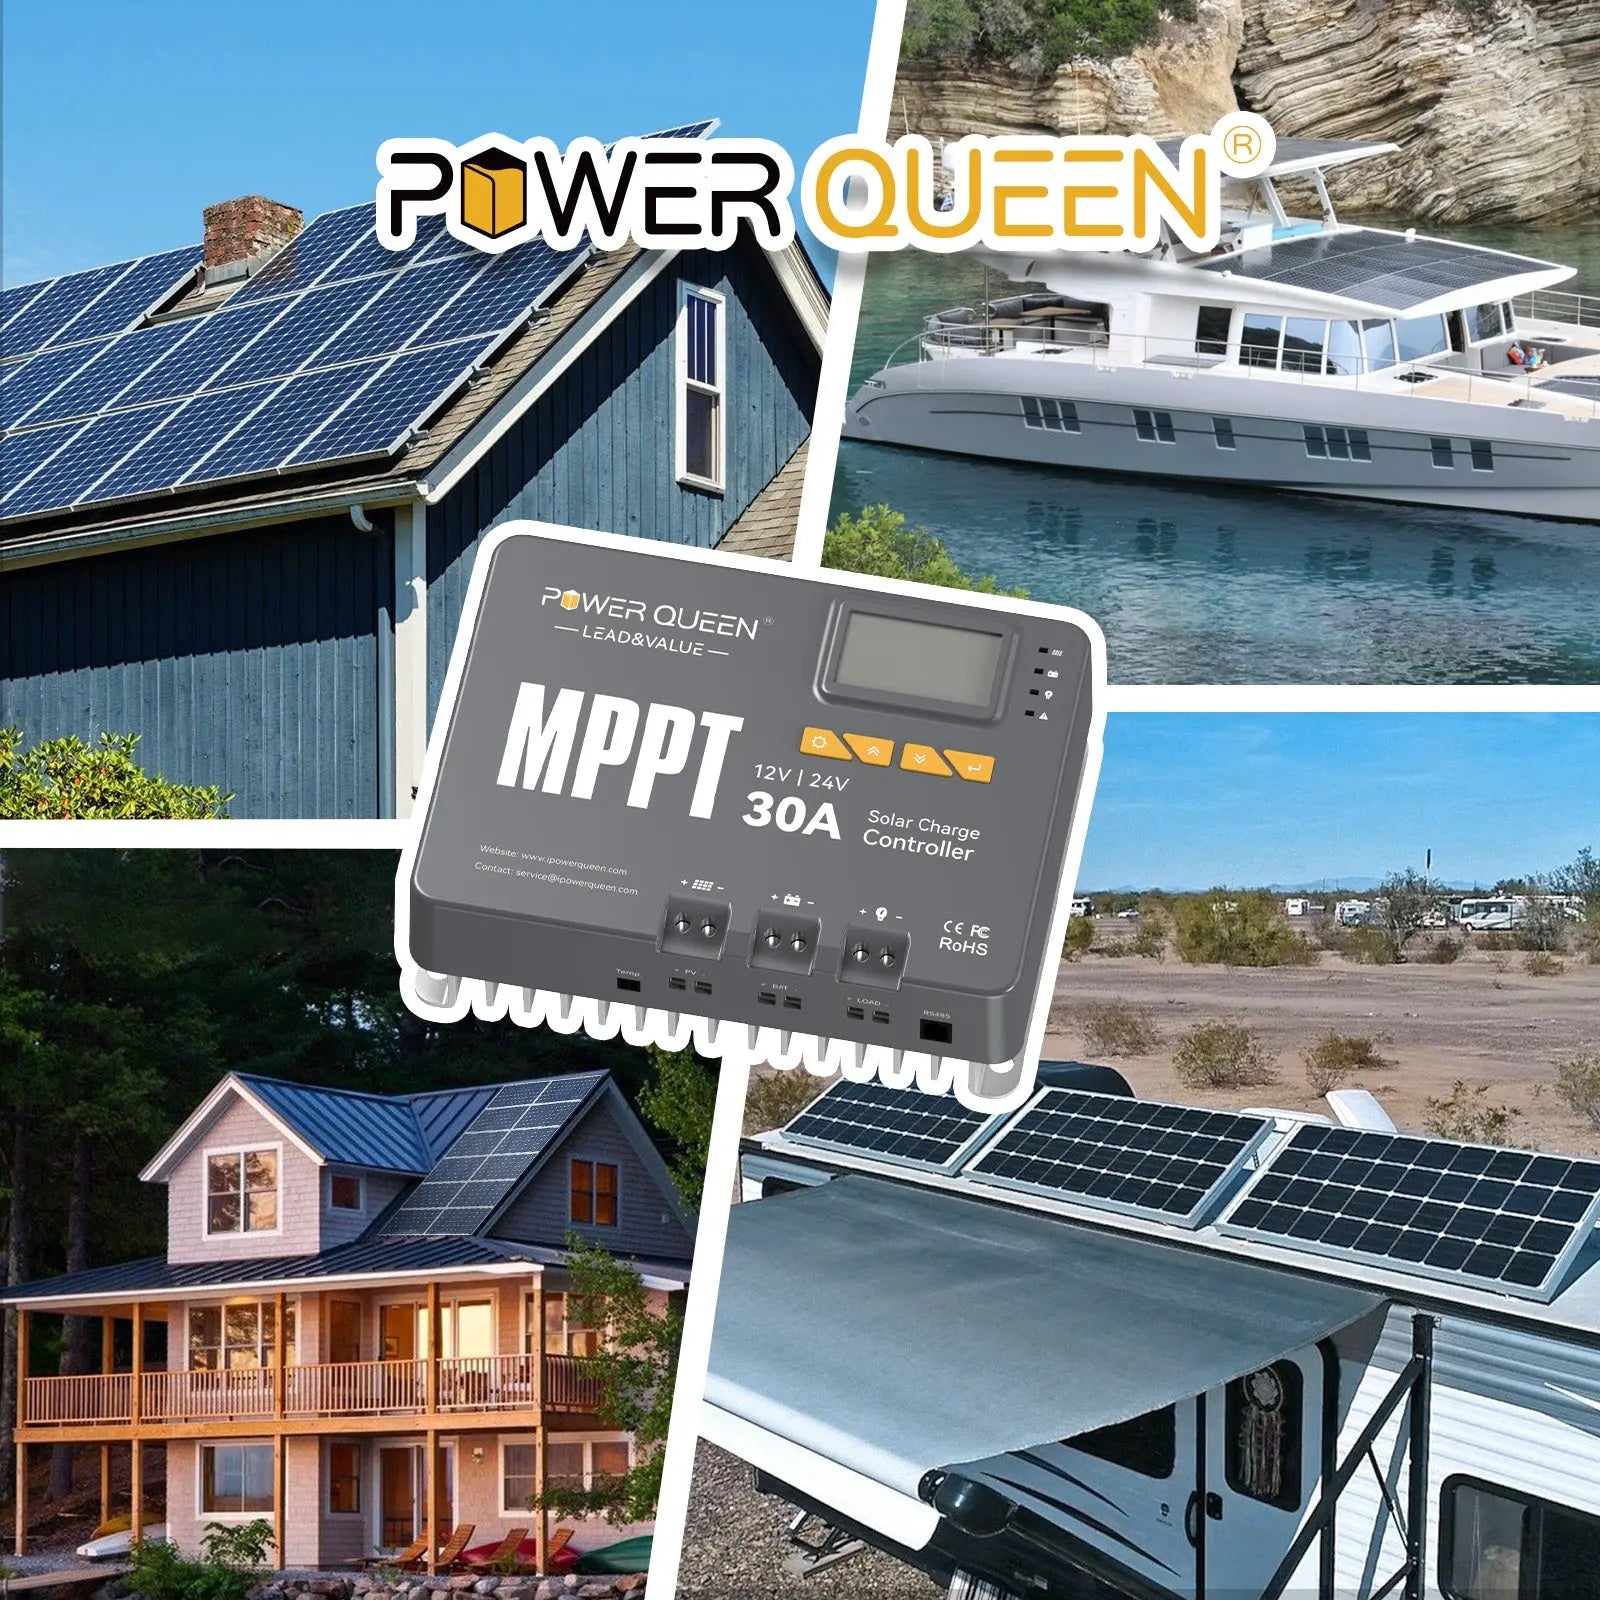 Power Queen 12/24V 30 Amp MPPT Solar Charge Controller & Bluetooth Adapter Power Queen